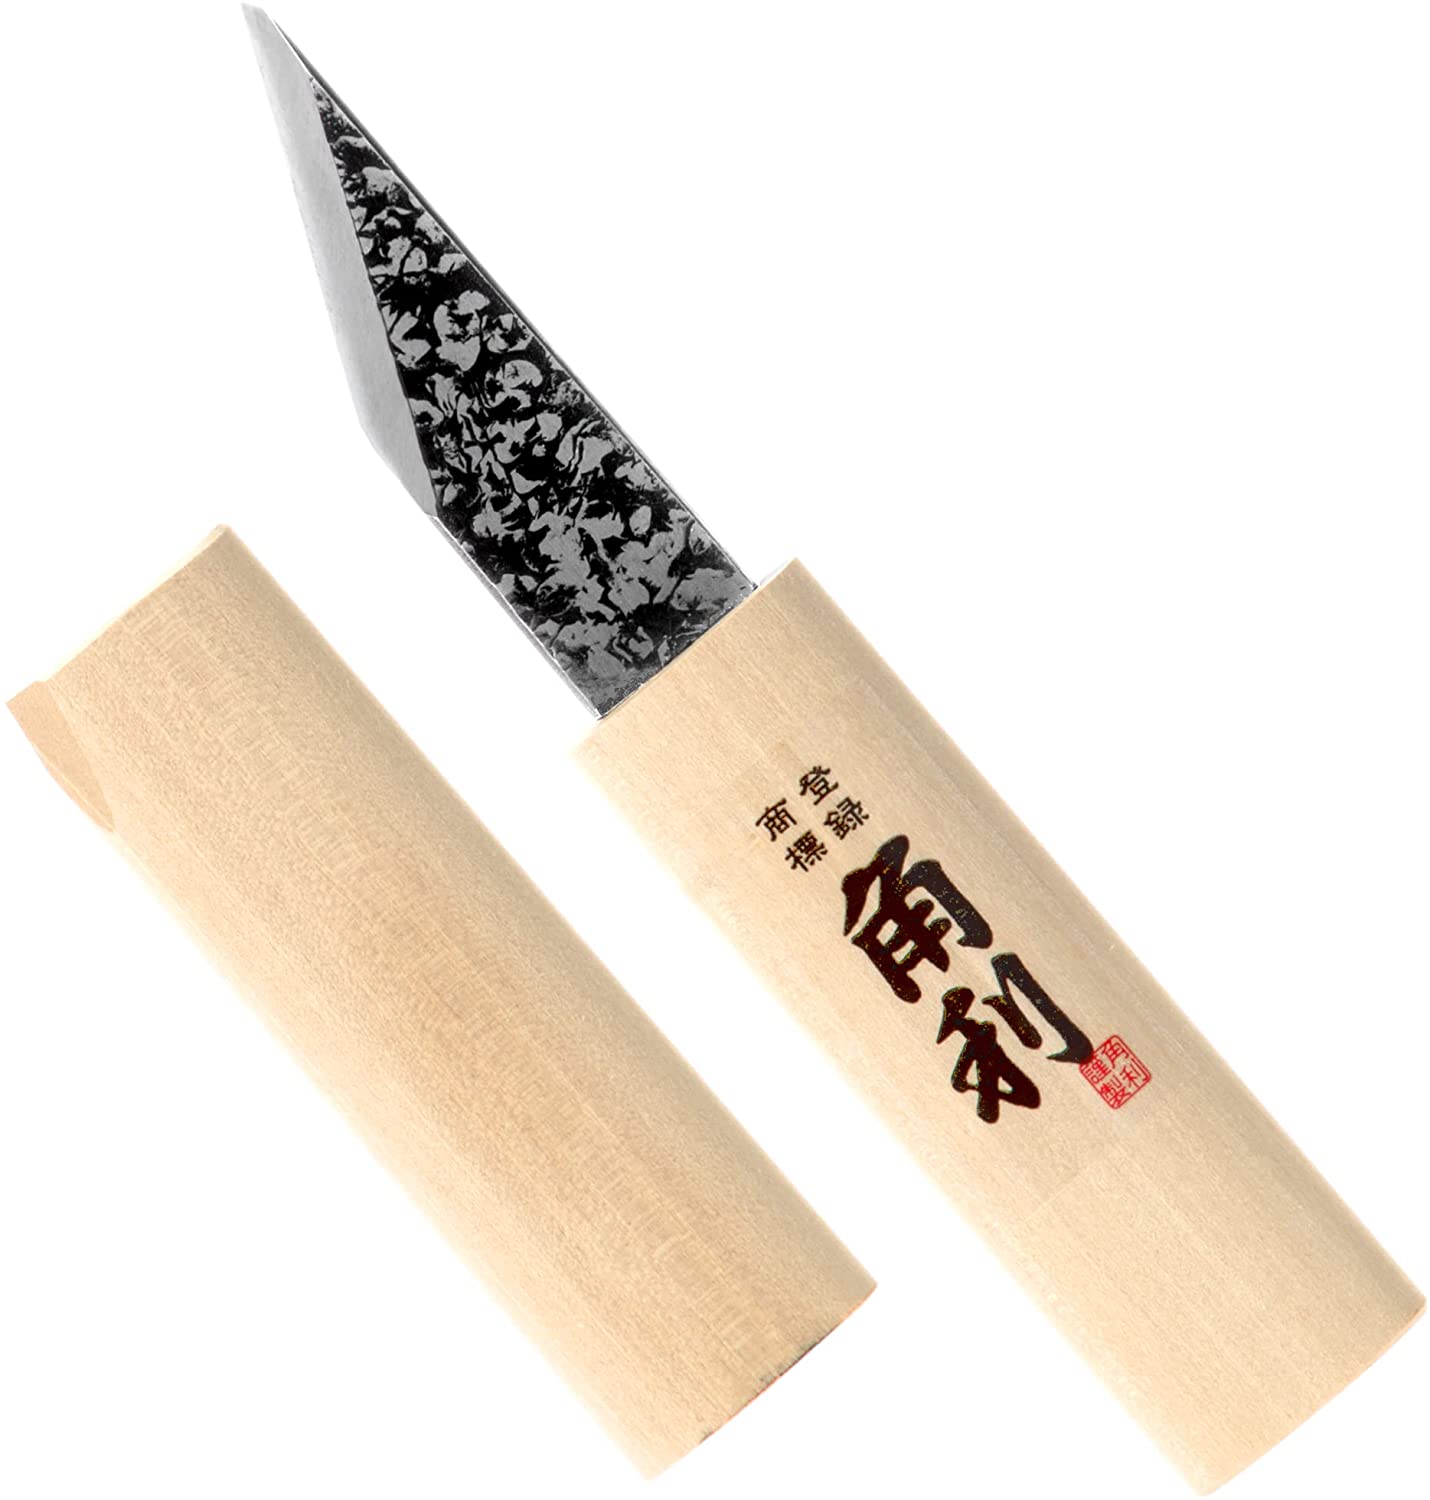 Japanese Woodworking Knife, Right-Hand